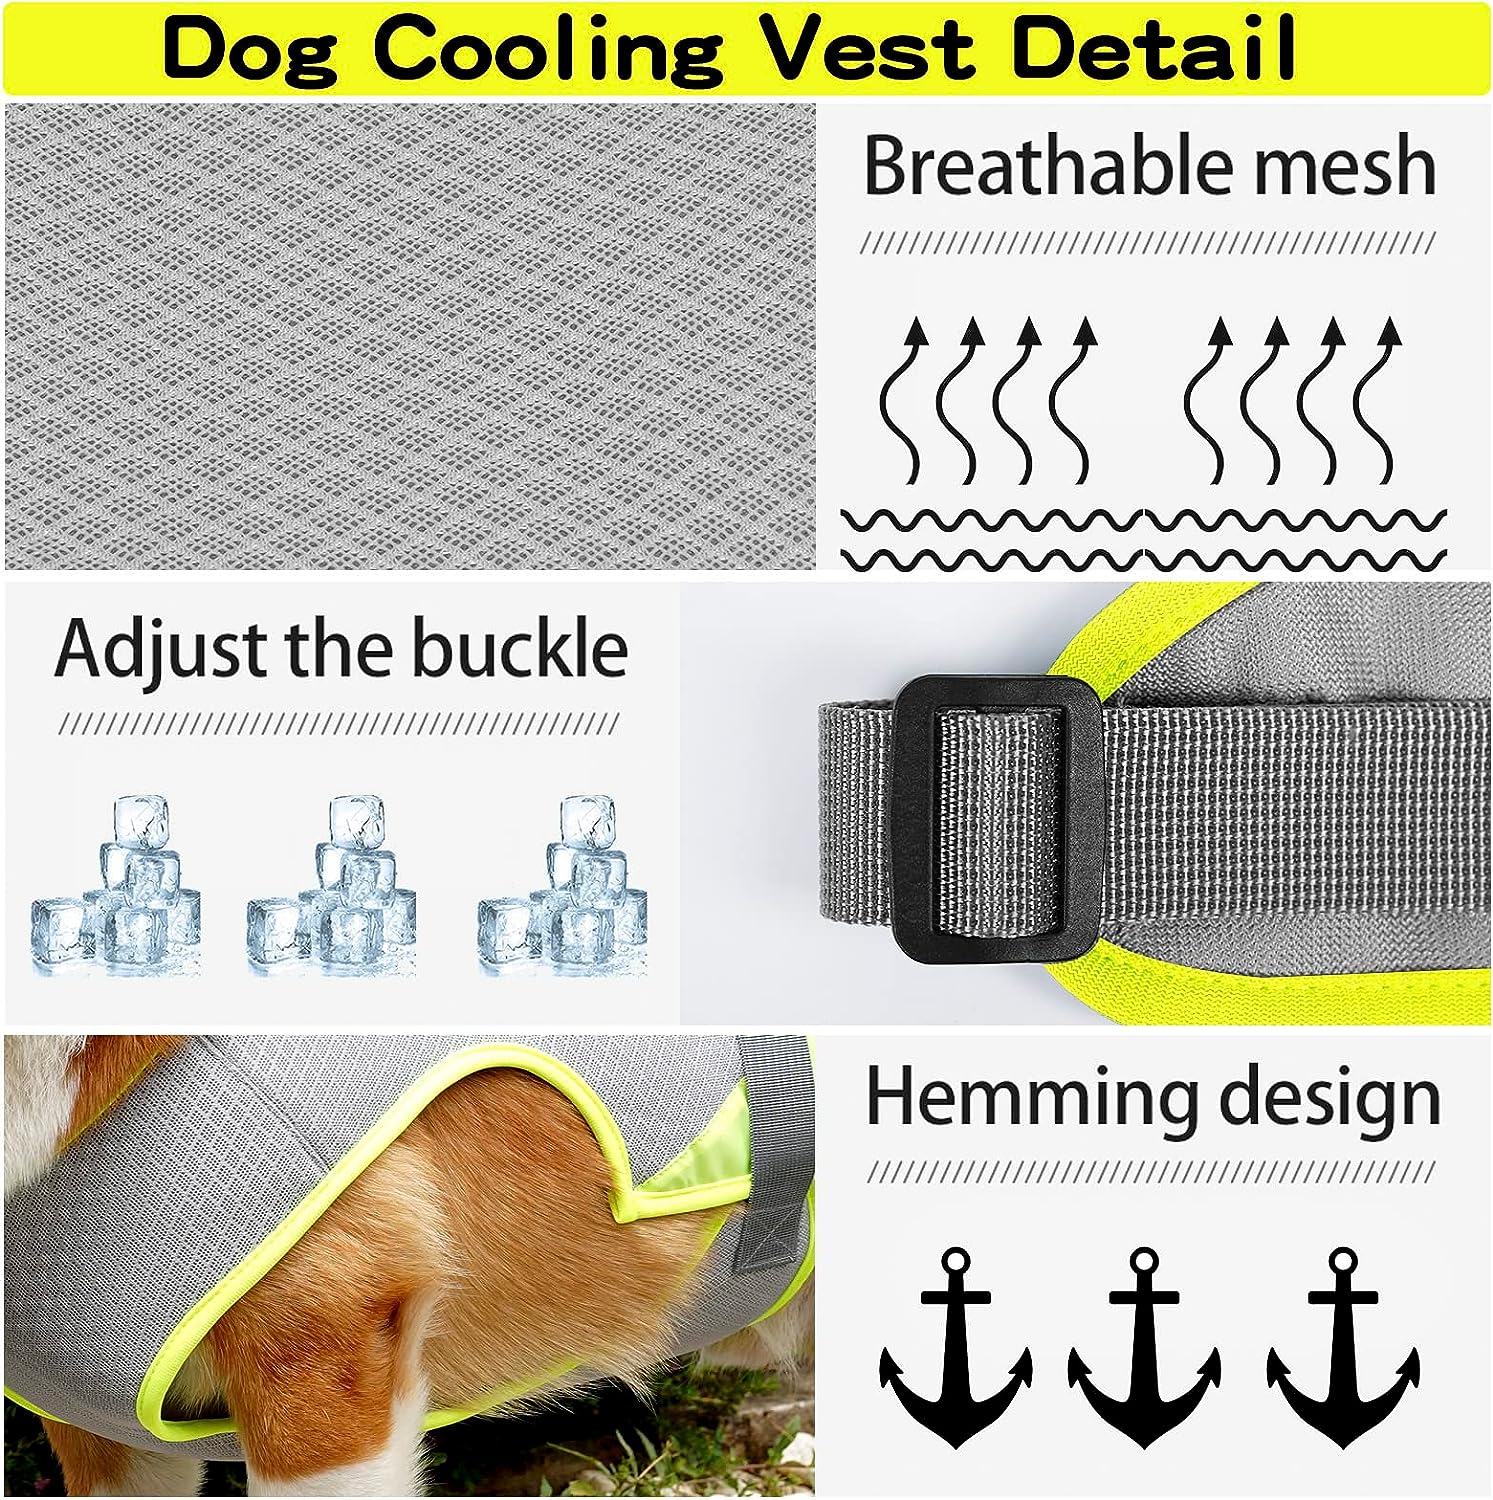 Comparing Dog Cooling Vests: Fit, Breathability, and Sun Protection